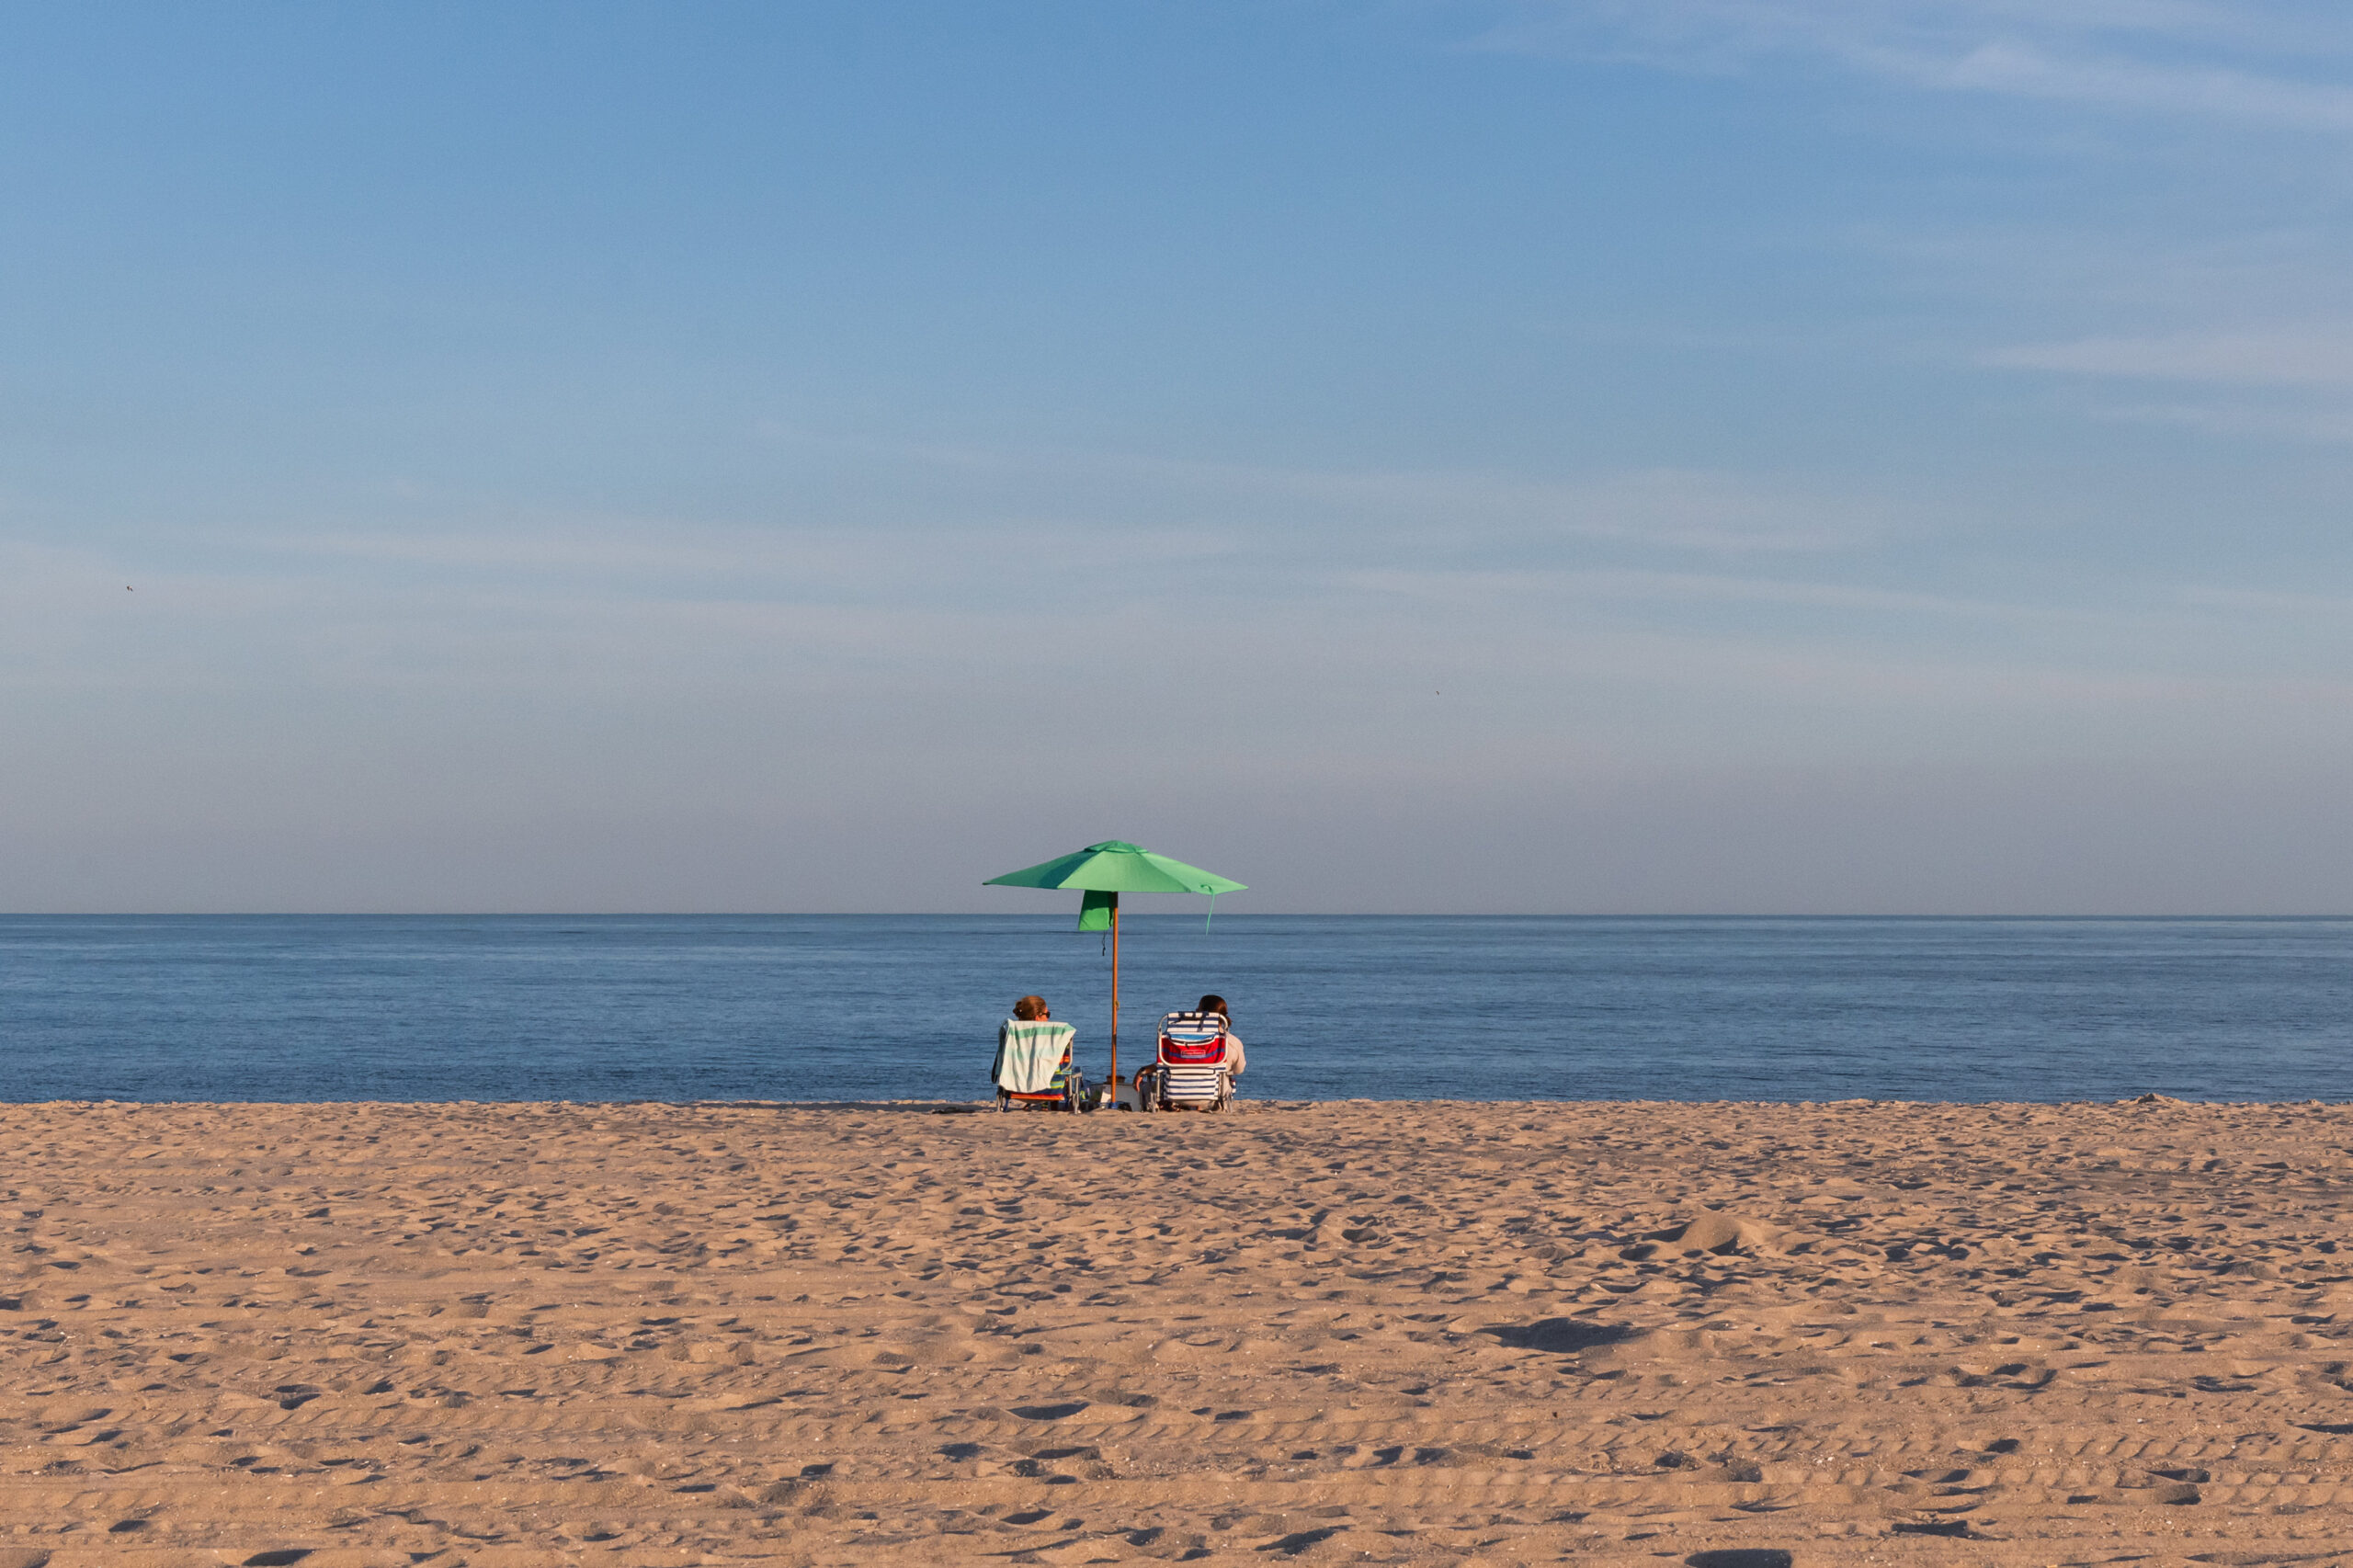 Two people sitting under a green beach umbrella on a clear day with a blue sky